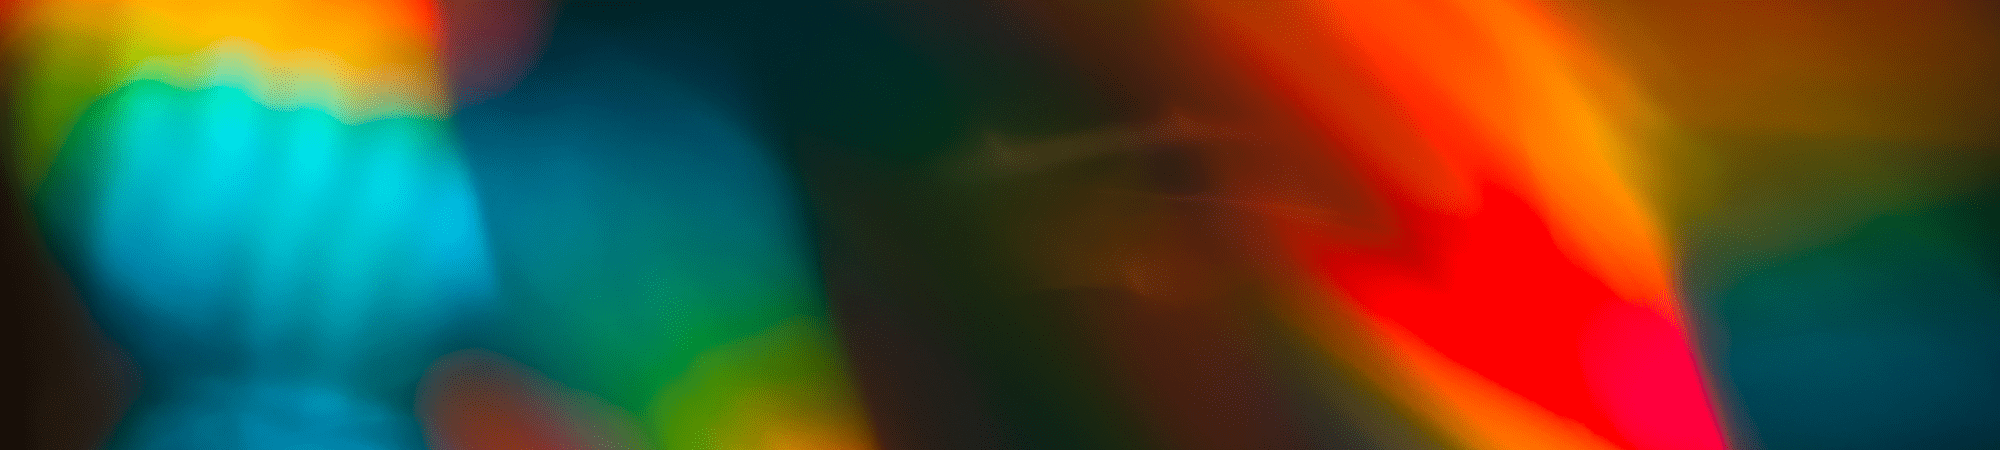 Light refractions, pattern of different colours